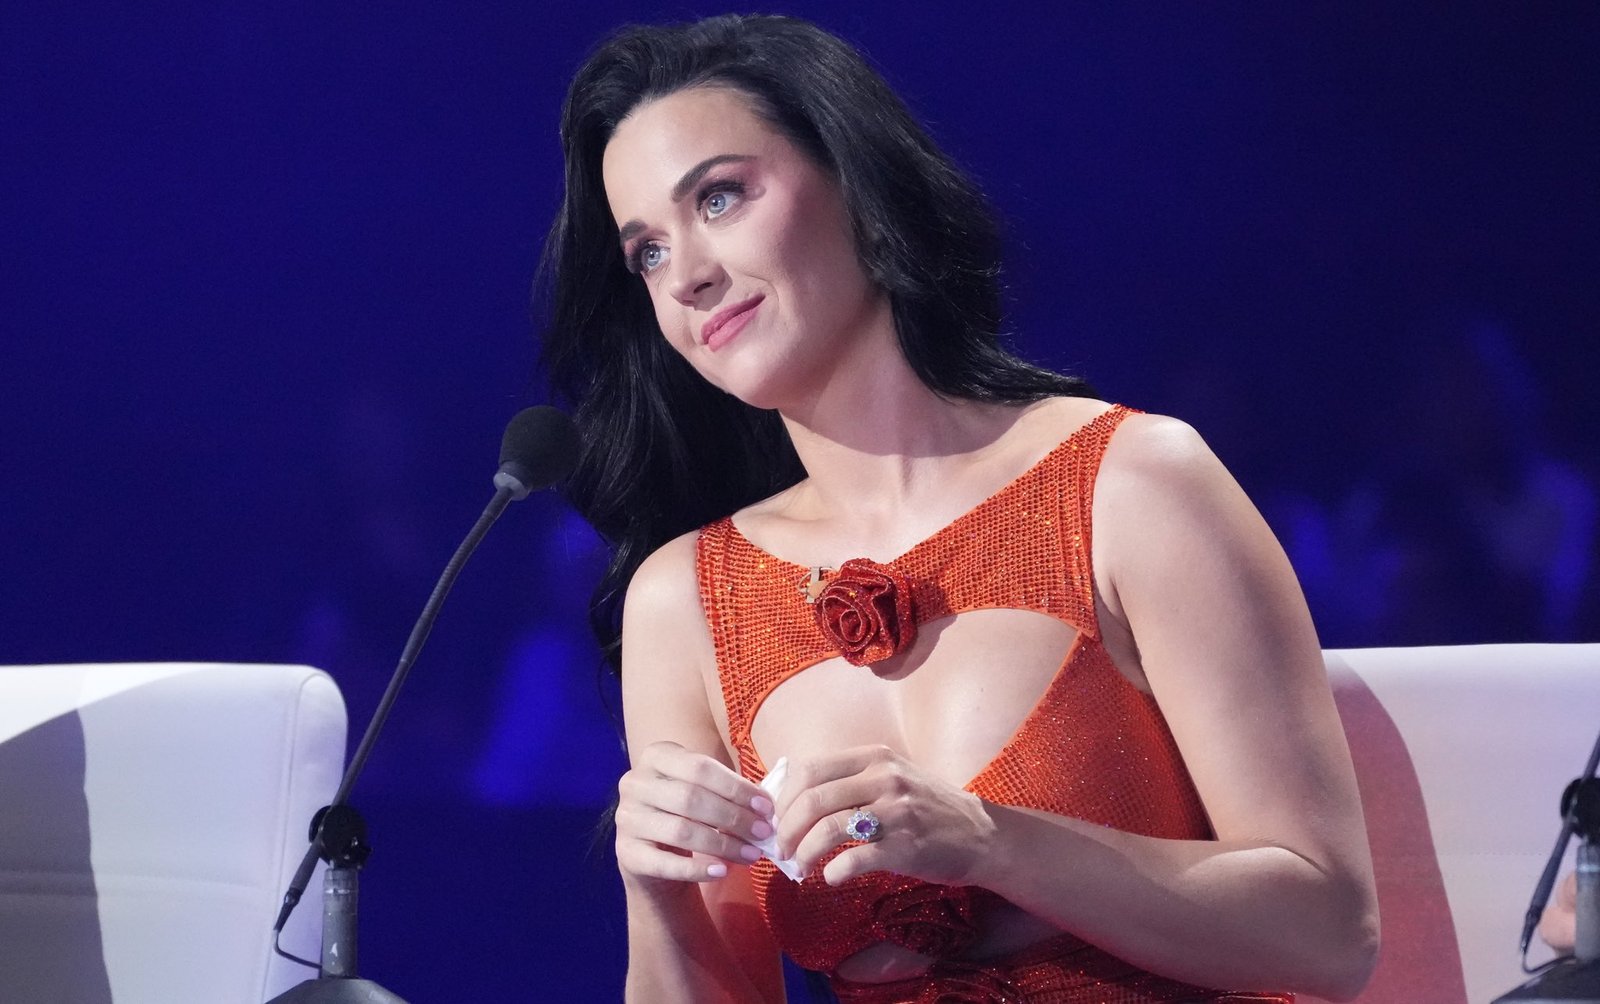 Katy Perry To Quit American Idol, Report Alleges